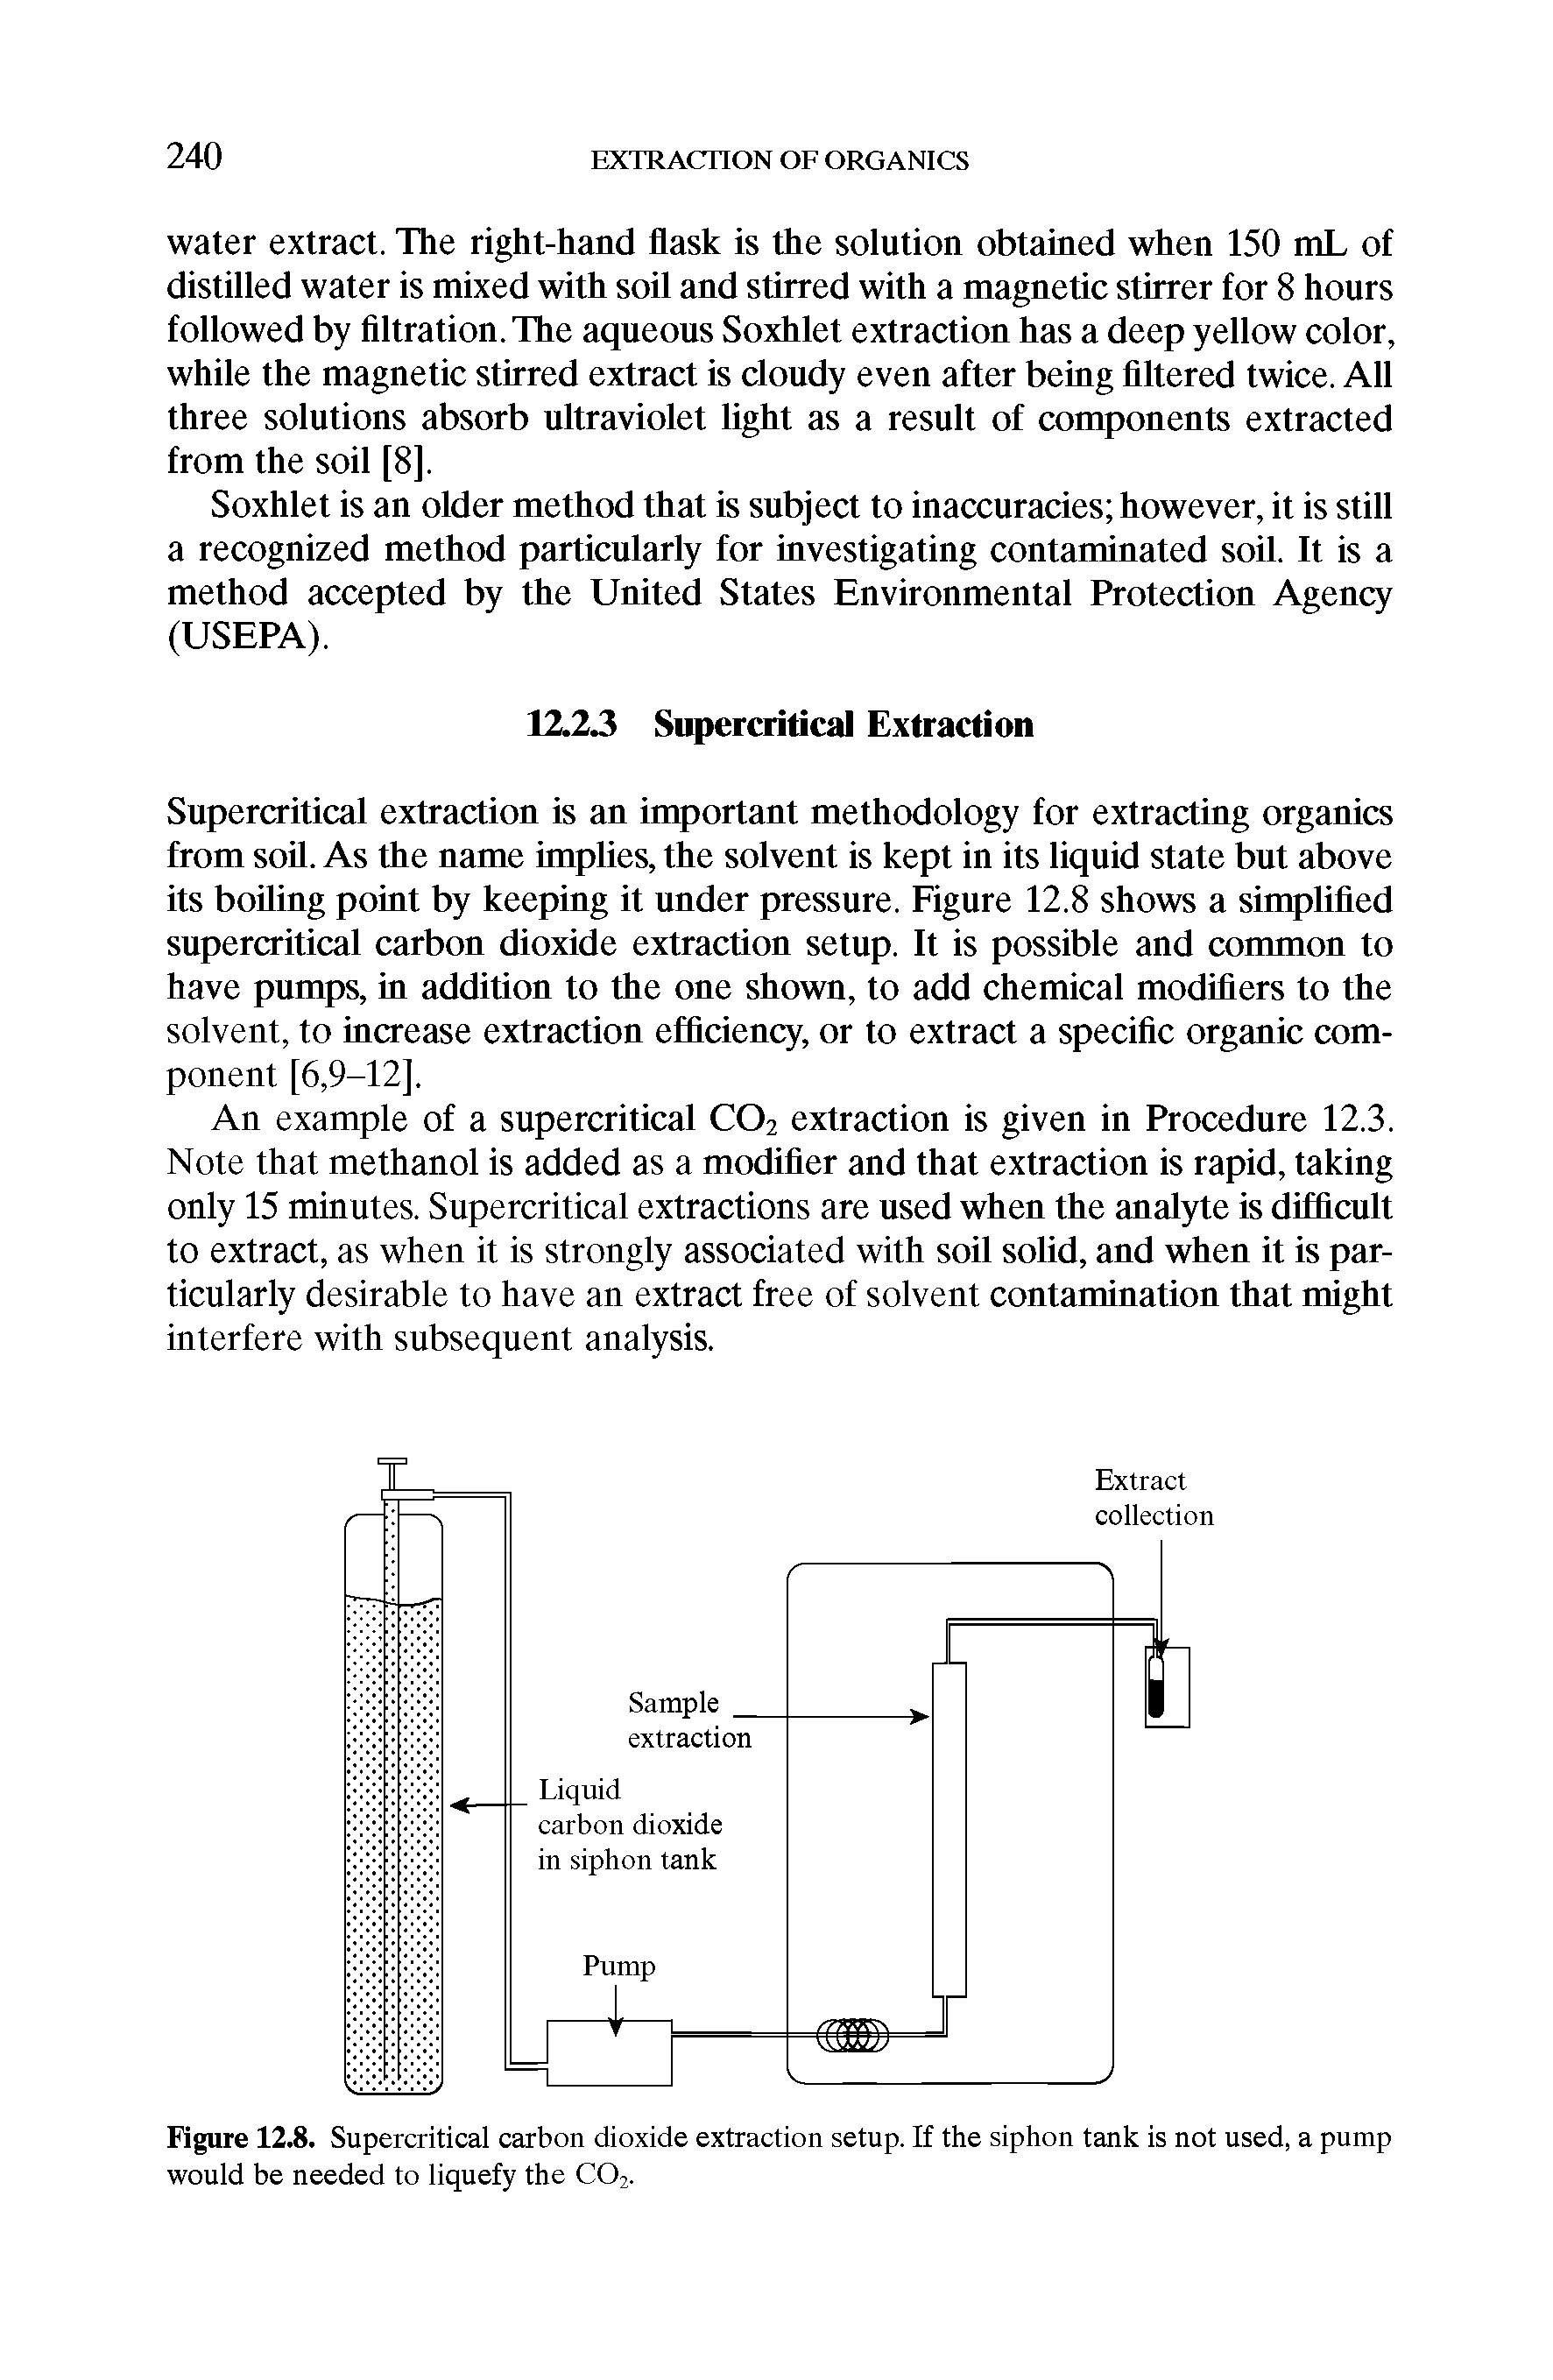 Figure 12.8. Supercritical carbon dioxide extraction setup. If the siphon tank is not used, a pump would be needed to liquefy the C02.